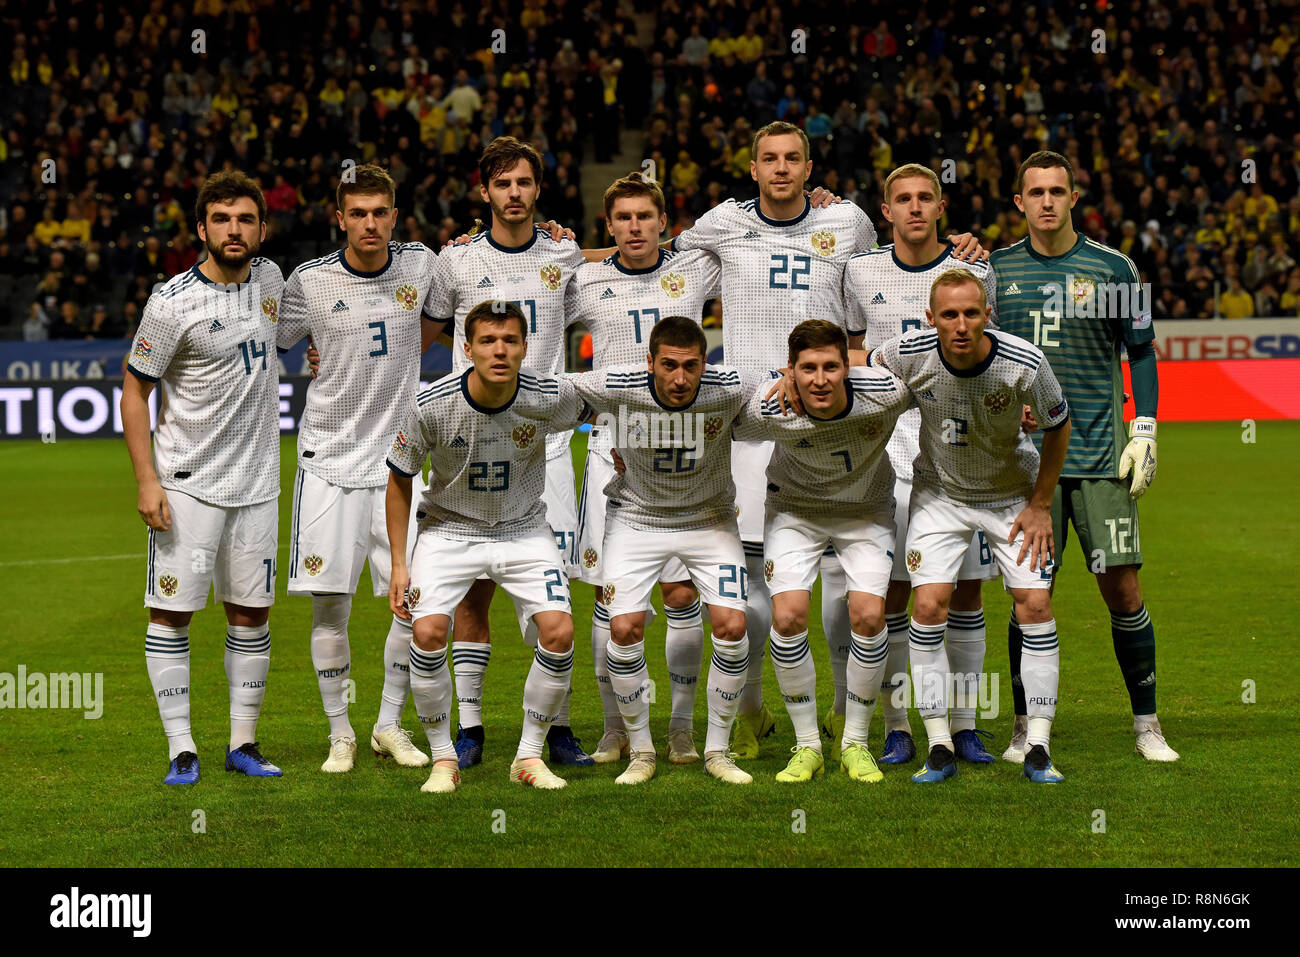 Stockholm, Sweden - November 20, 2018. Russia national football team before UEFA Nations League match Sweden vs Russia in Stockholm. Stock Photo